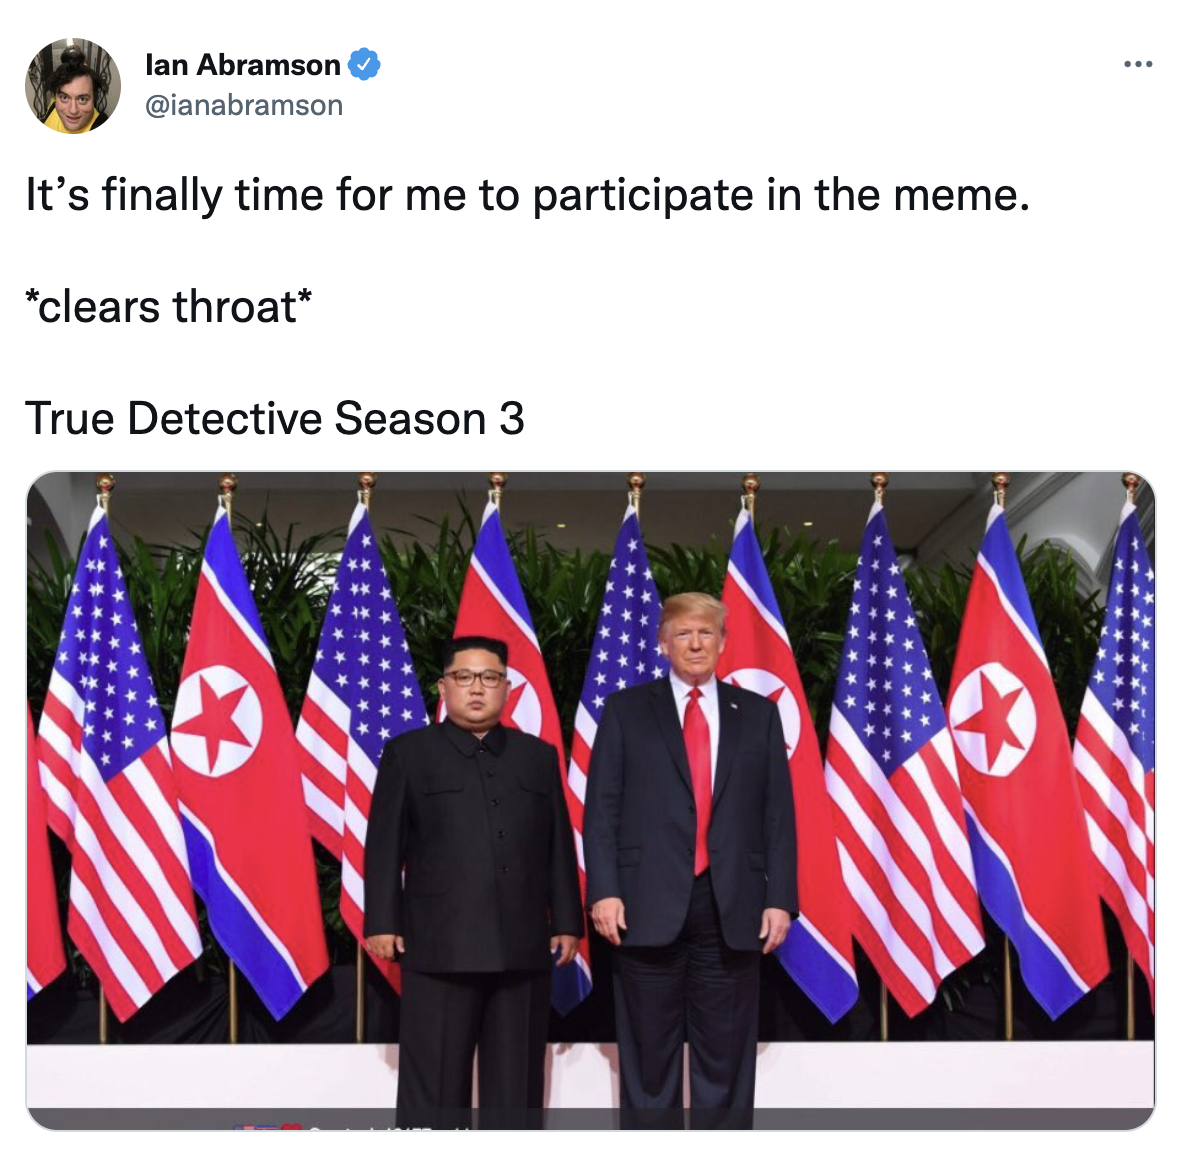 True Detective show memes - trump kim jong un meeting - lan Abramson It's finally time for me to participate in the meme. clears throat True Detective Season 3